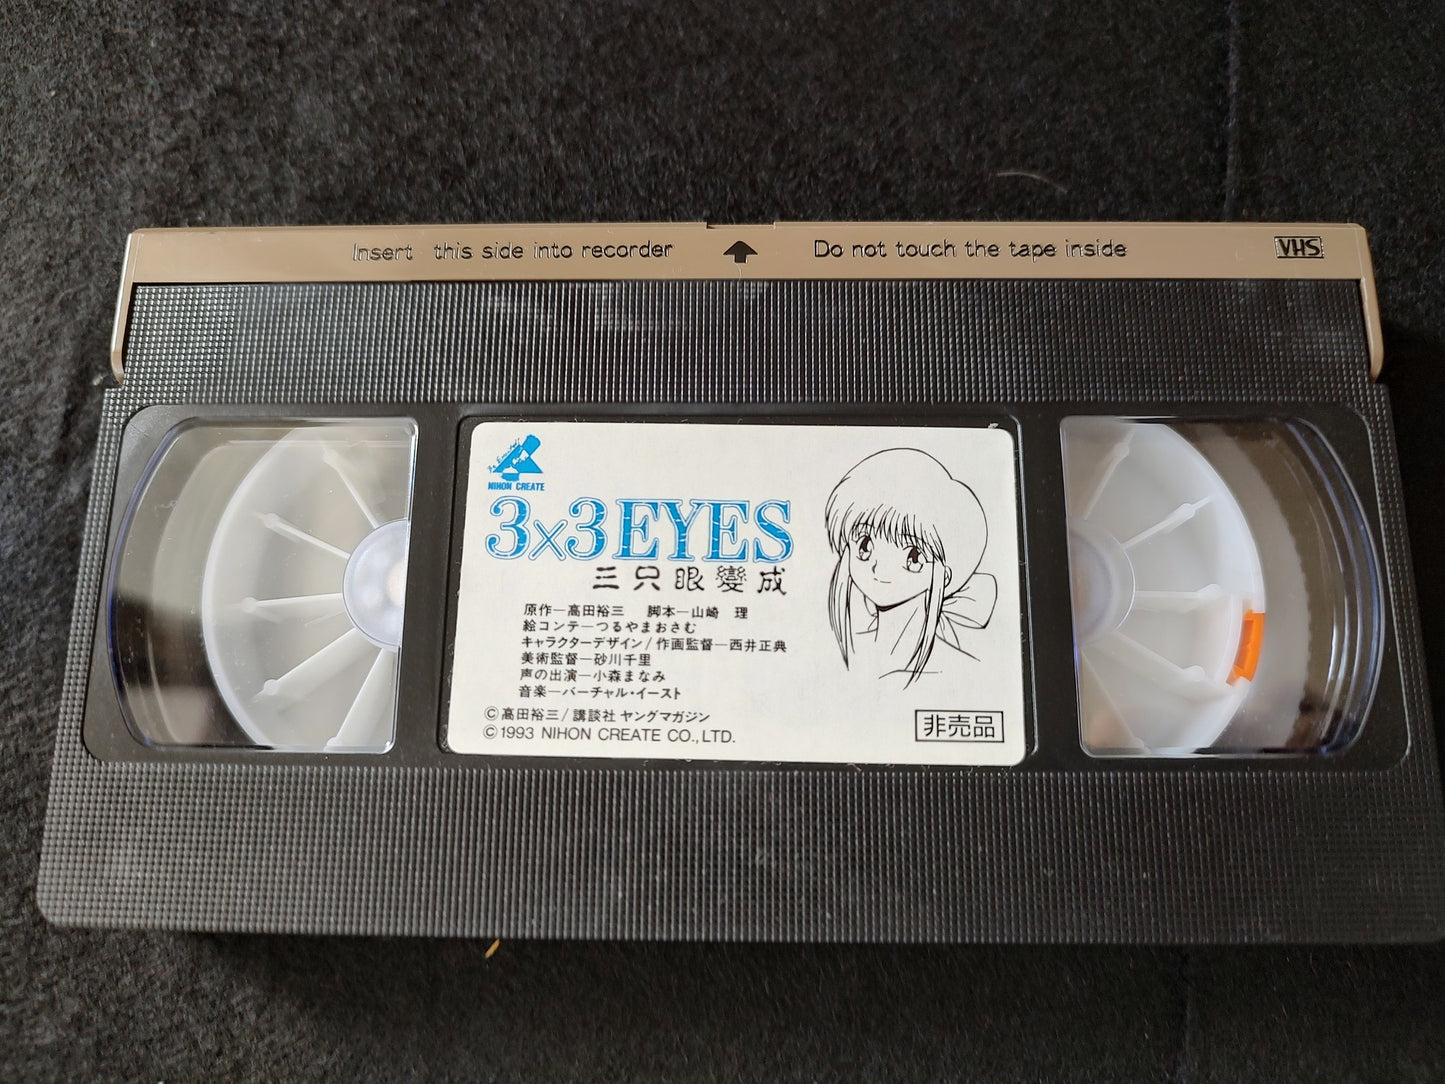 3×3 EYES FM TOWNS Marty Game, Disk, w/Manual and Box set, Working-f0706-